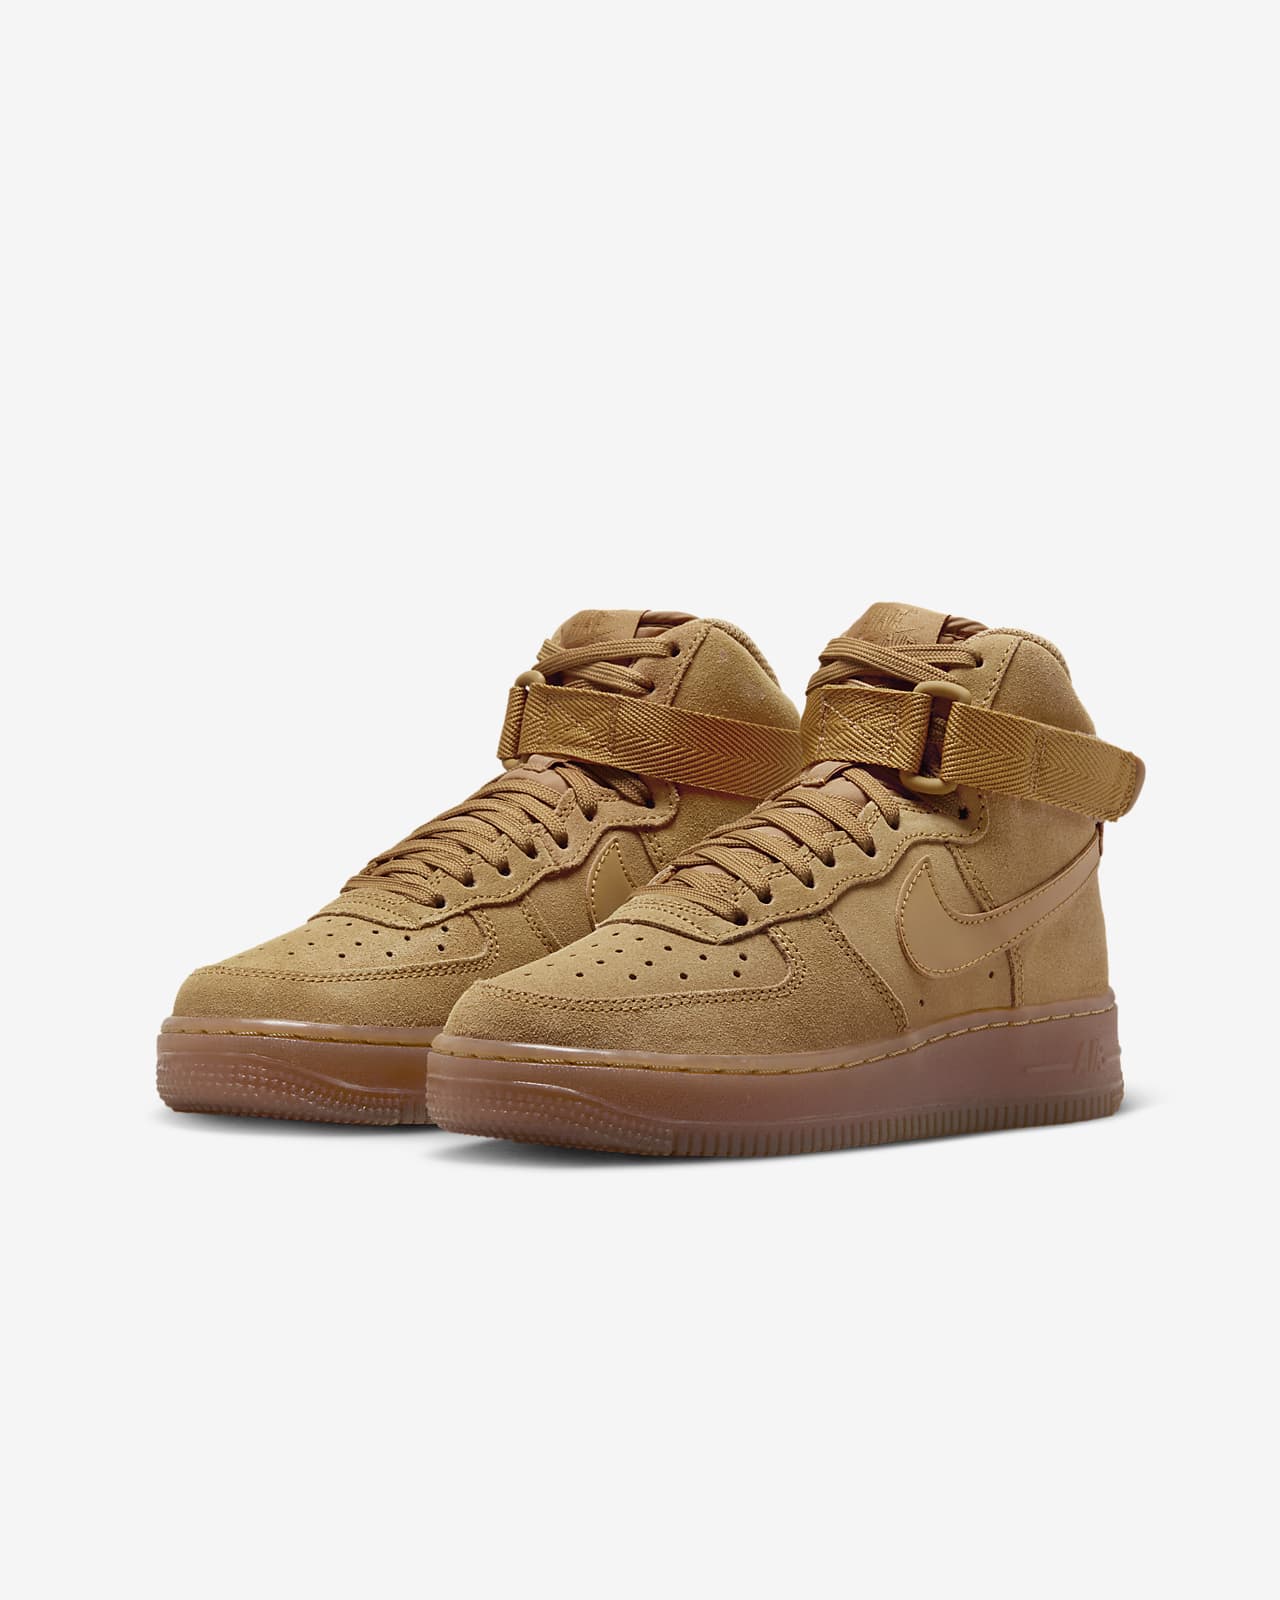 chaussure nike air force 1 hight